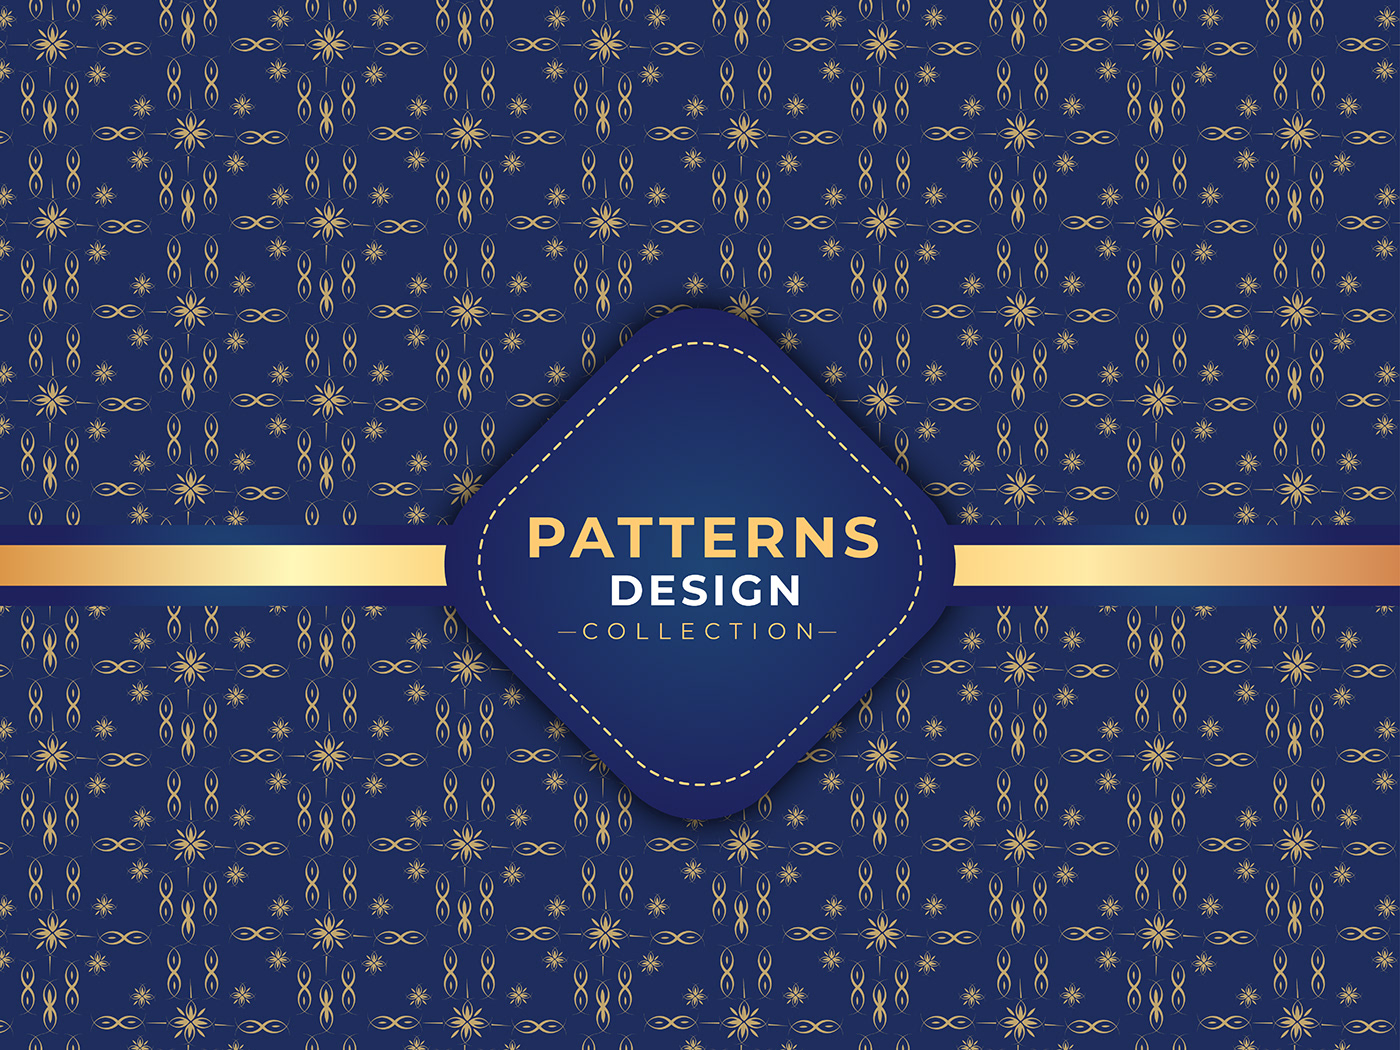 Design Pattern floral Flowers geomatric pattern patterndesign Patterns Patterns and Repeats seamless textures